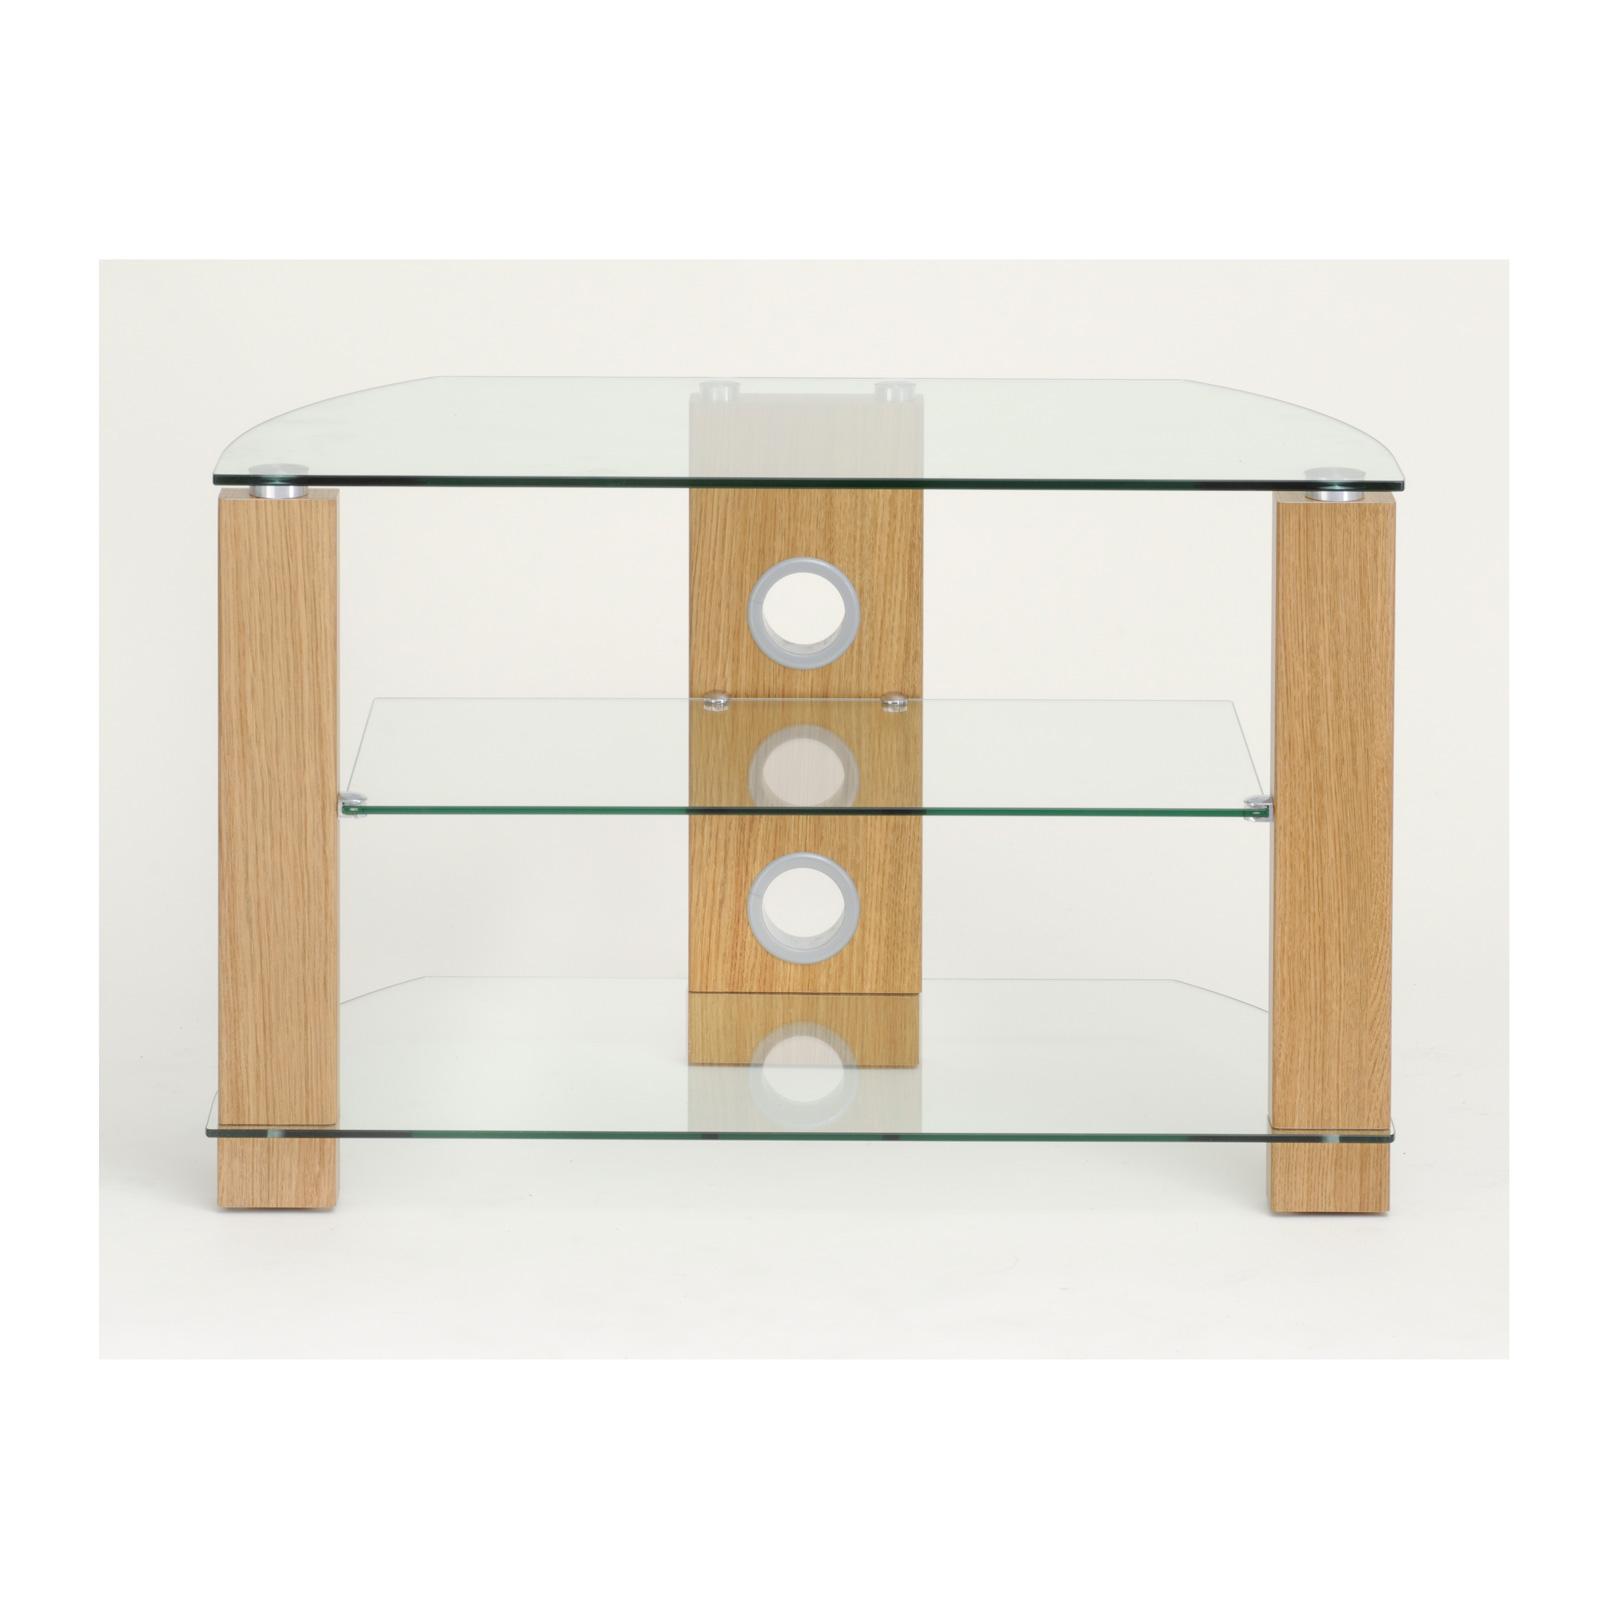 Image of TTAP L630 600 3OC Vision 600mm TV Stand in Light Oak with Clear Glass